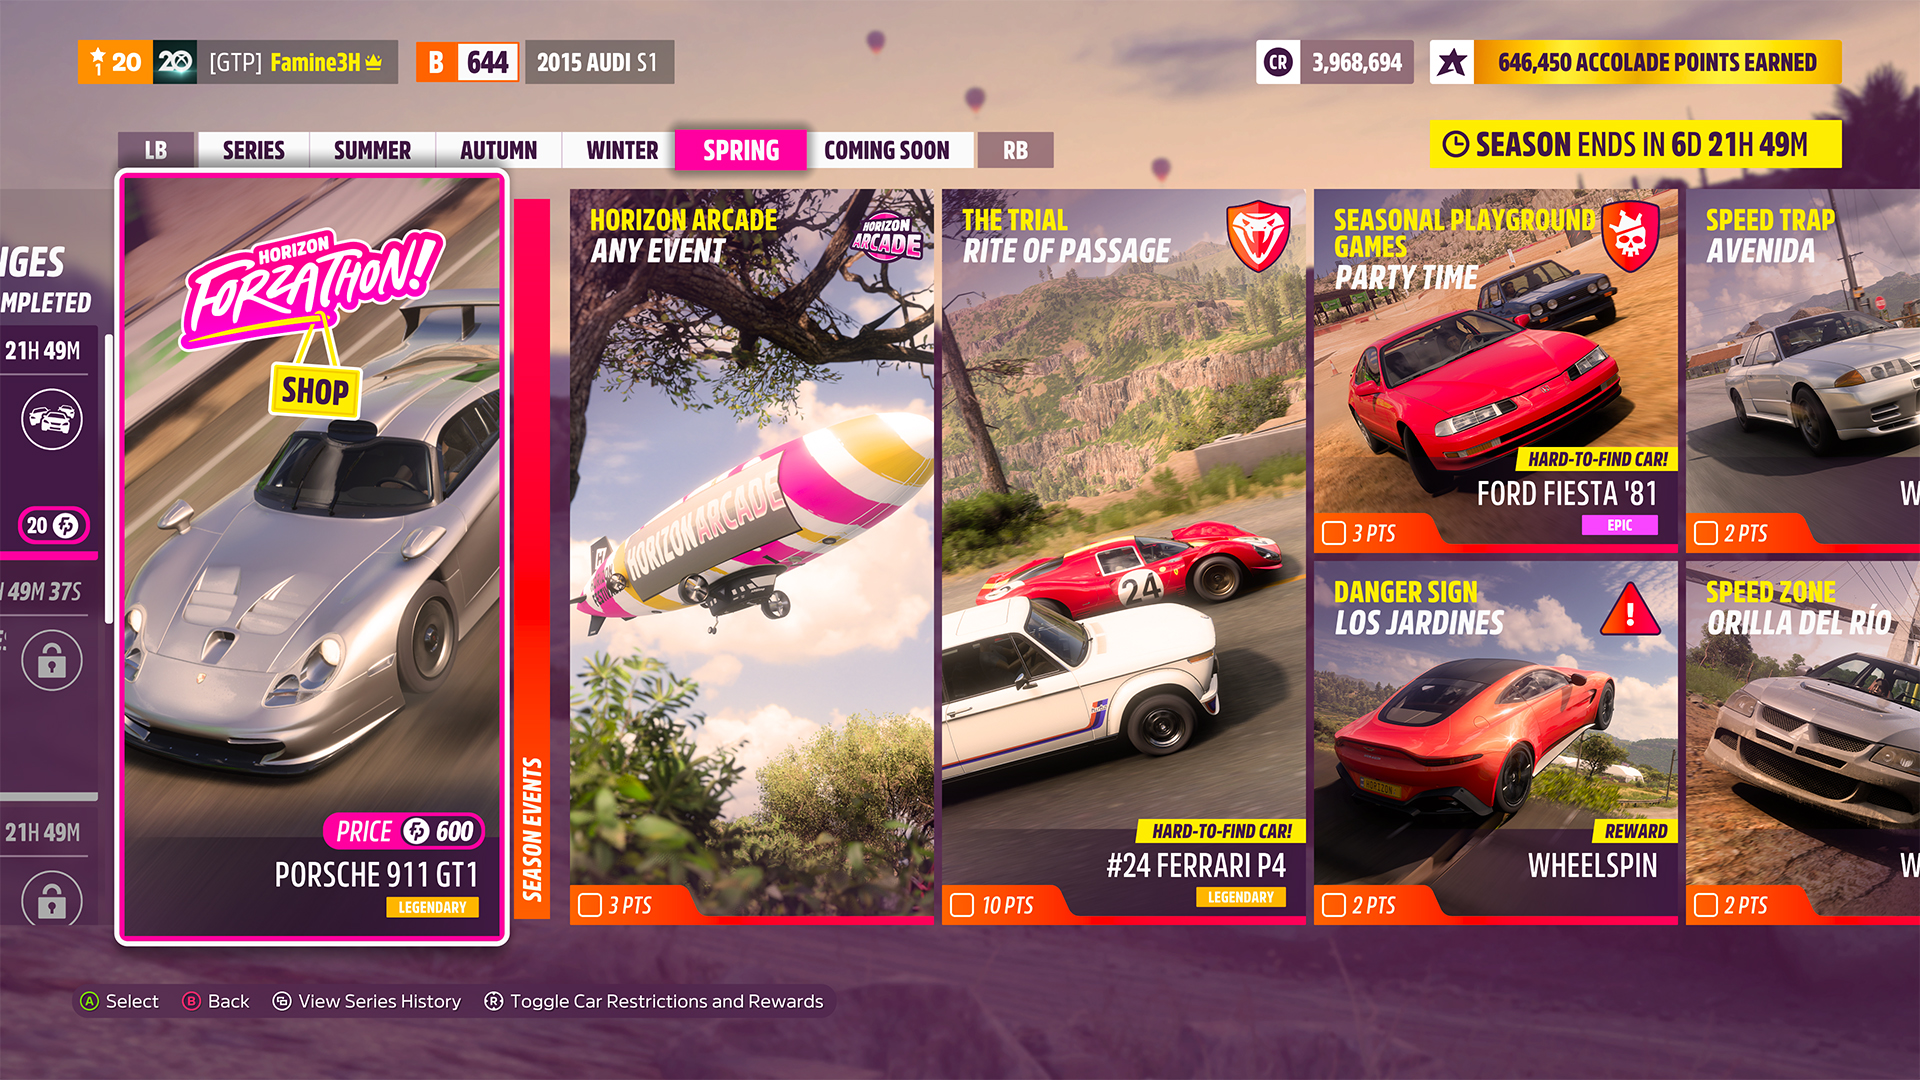 OFFICIAL] Forza Horizon 5  No Lag, Unlimited Play Time 😲 